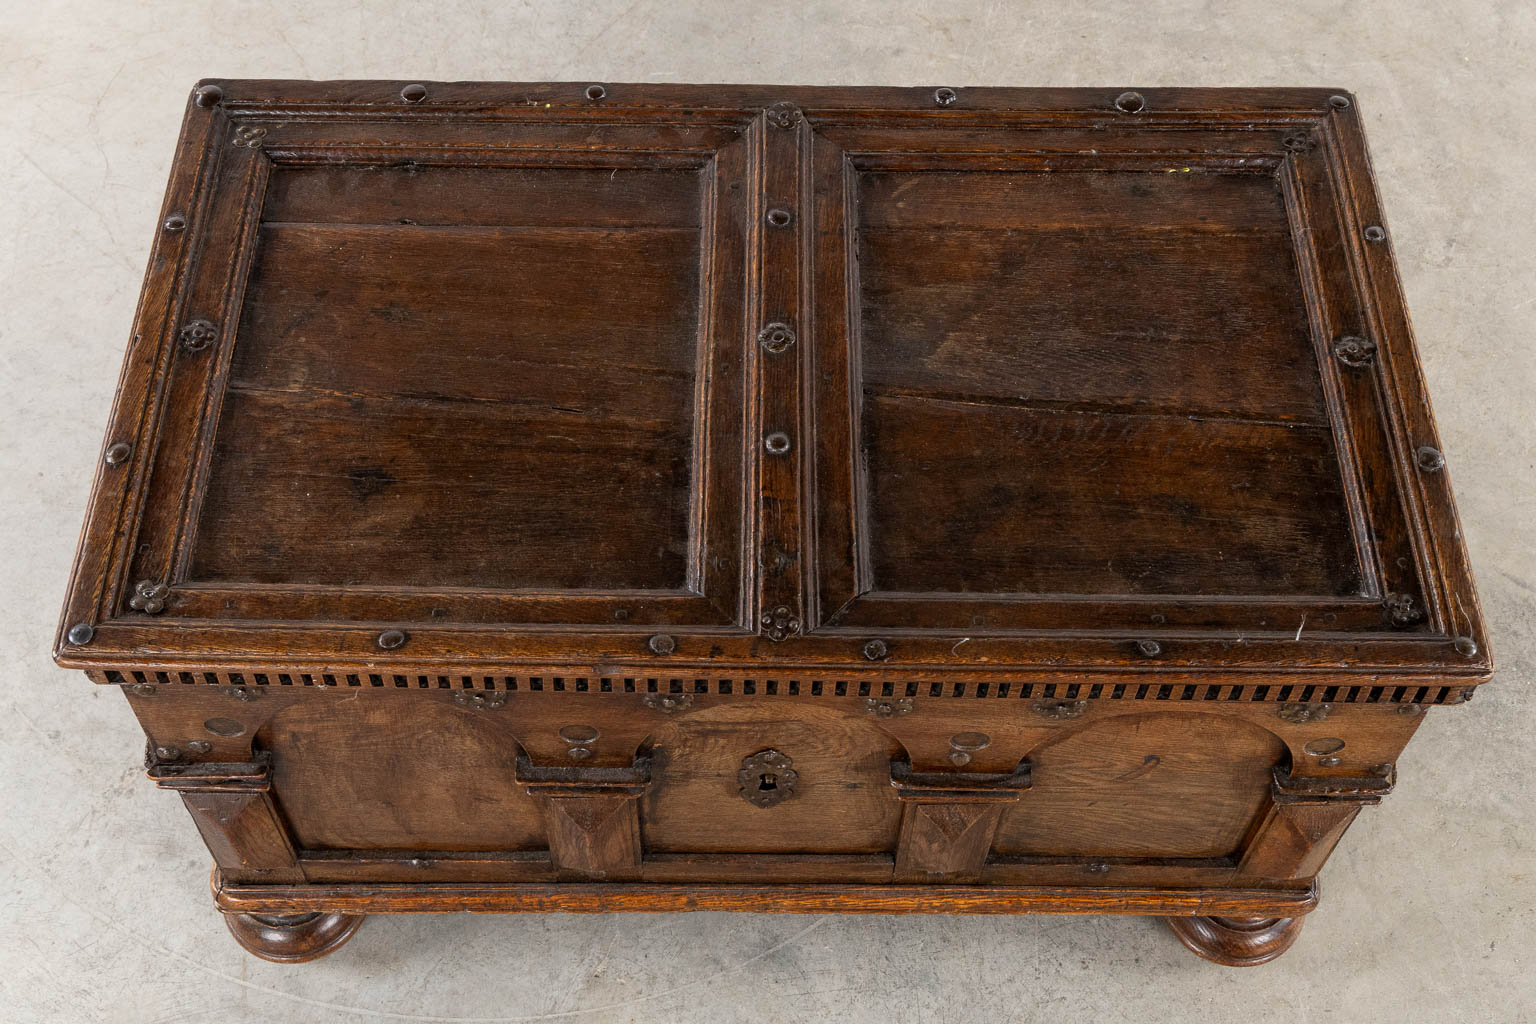 An antique chest mounted with wrought-iron, The Netherlands, 17th C. (L:57 x W:97 x H:56 cm)